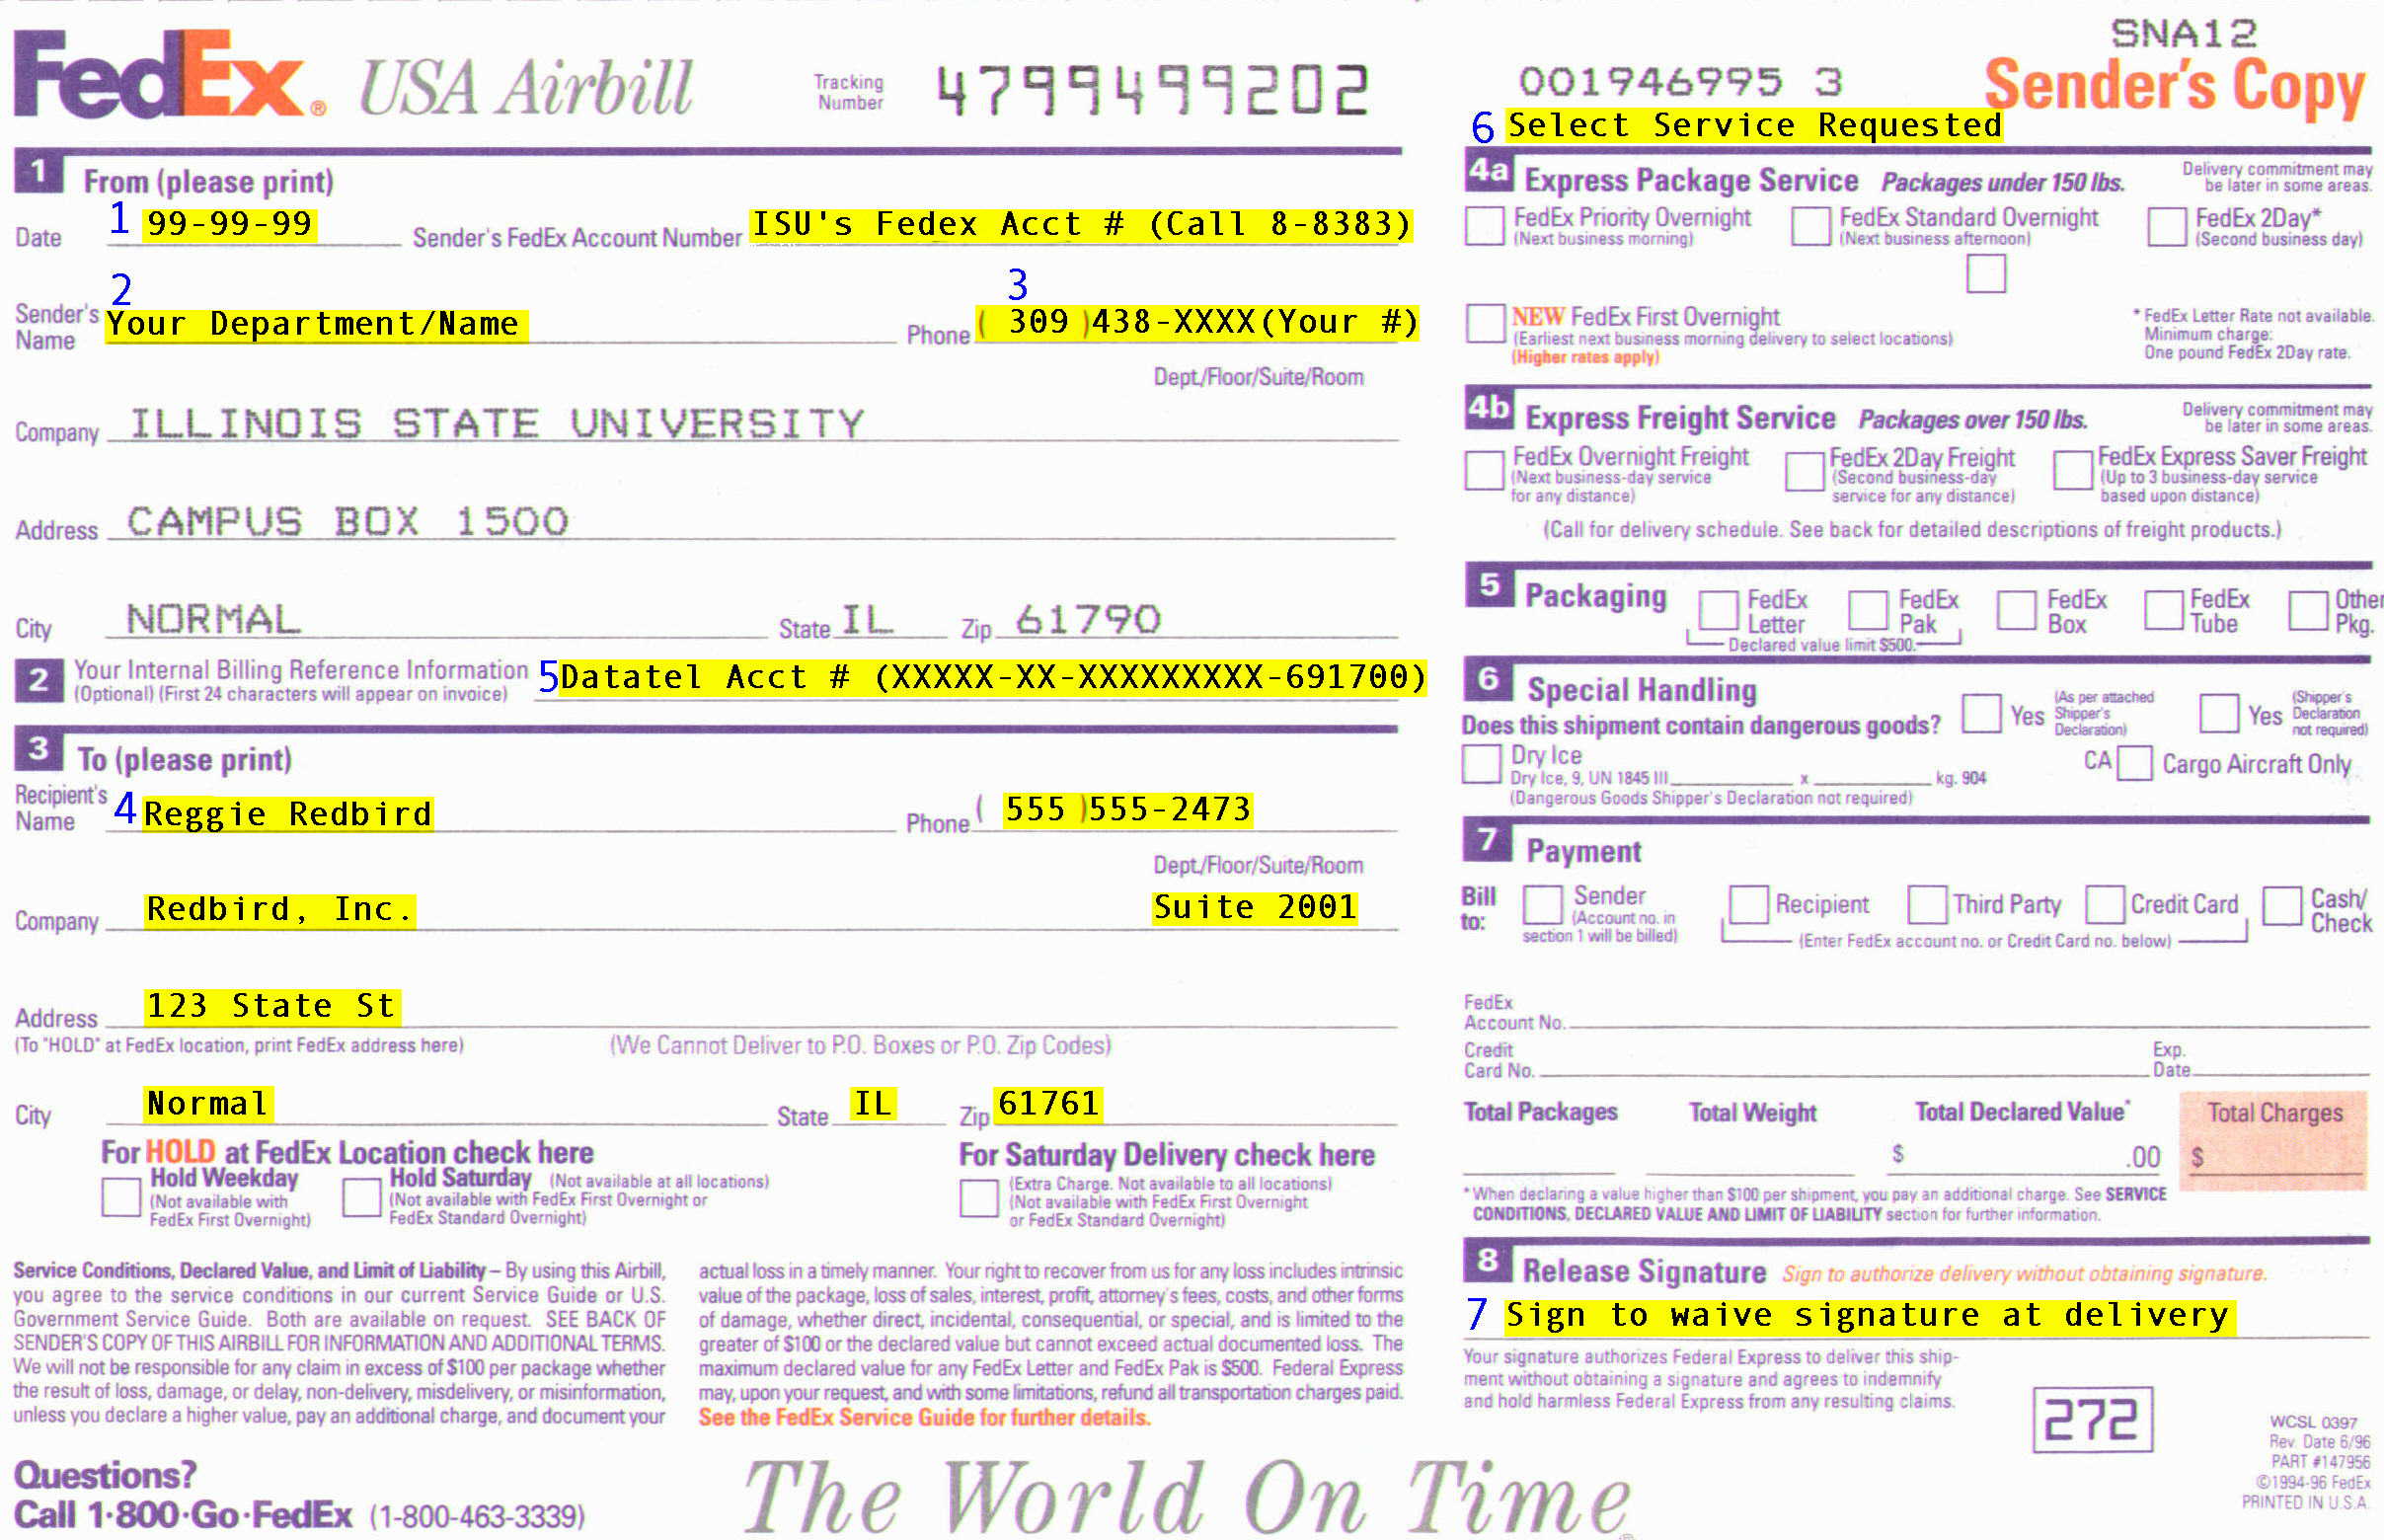 Example of the Fed Ex Airbill